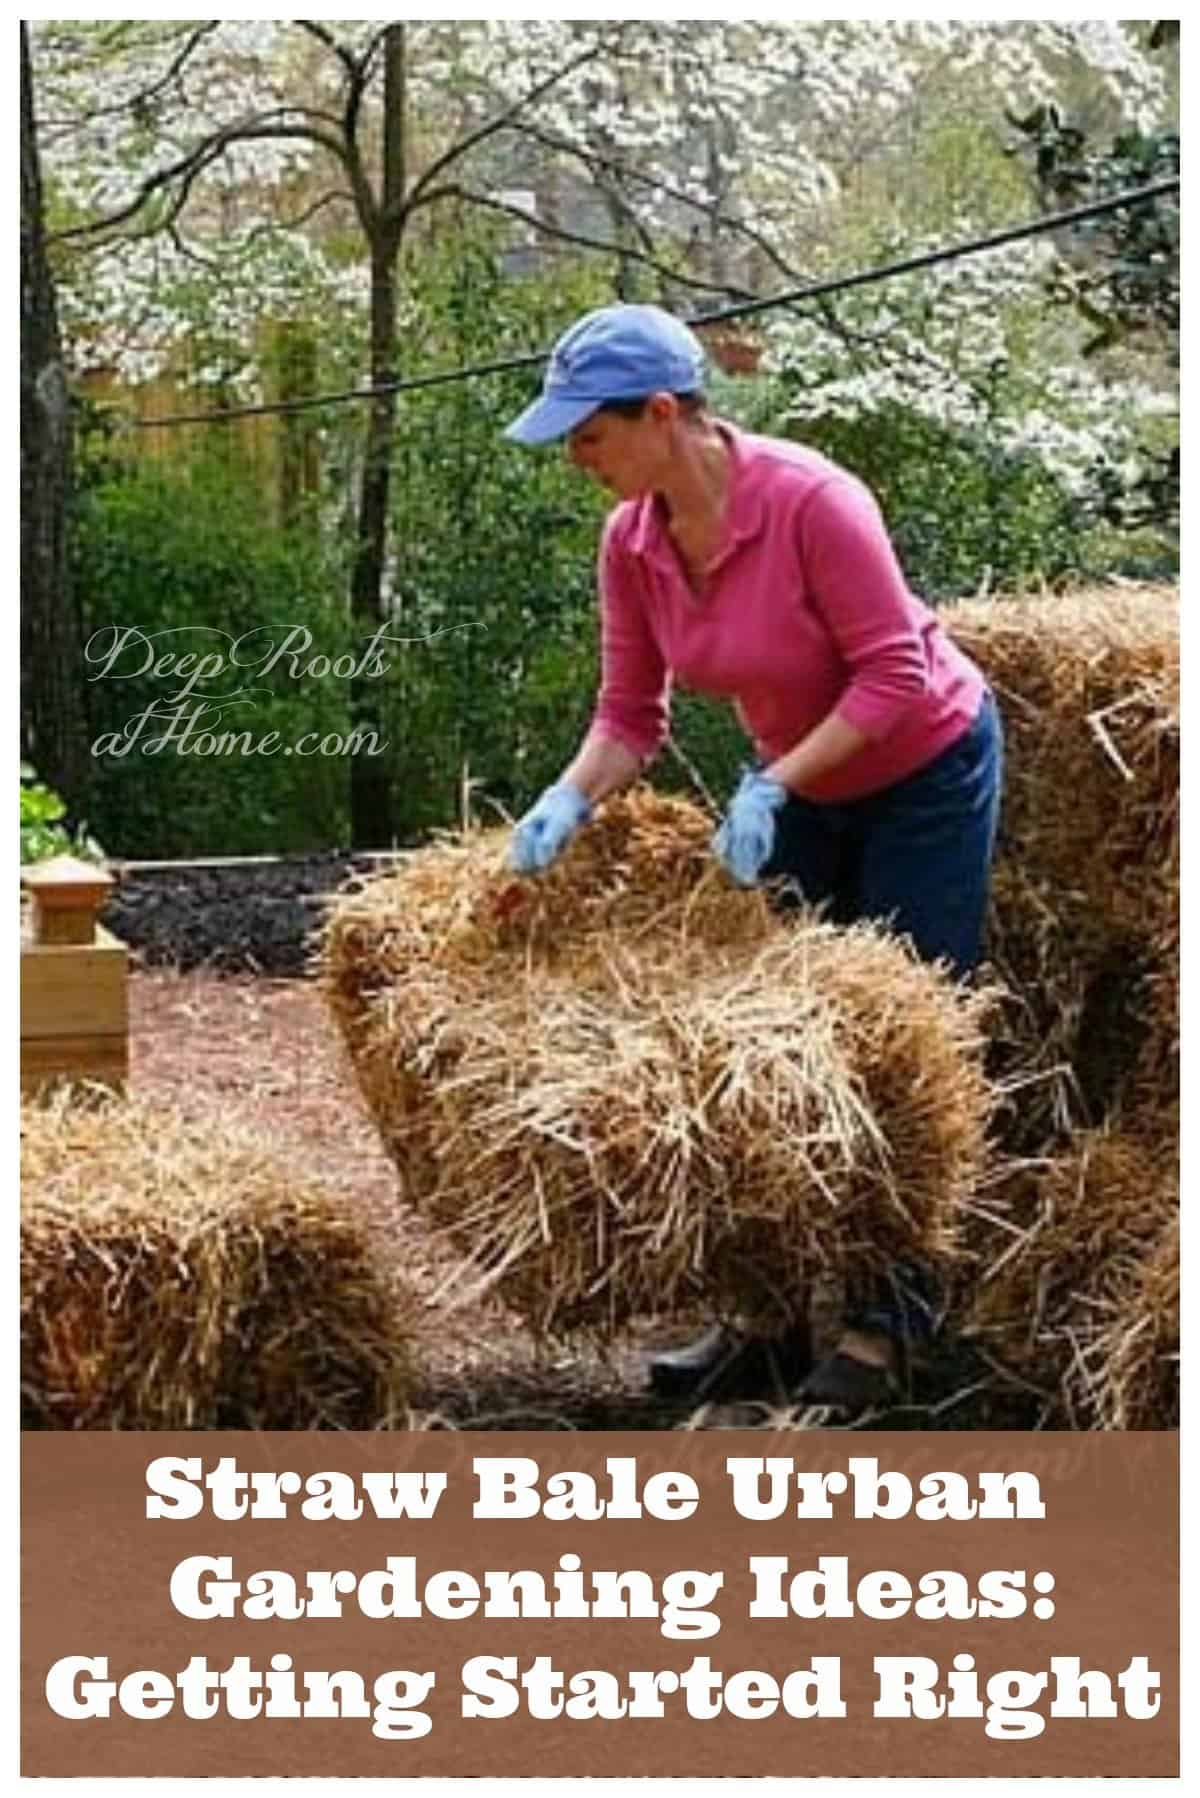 Straw Bale Urban Gardening: Ideas and Getting Started Right. small scale straw bale gardening